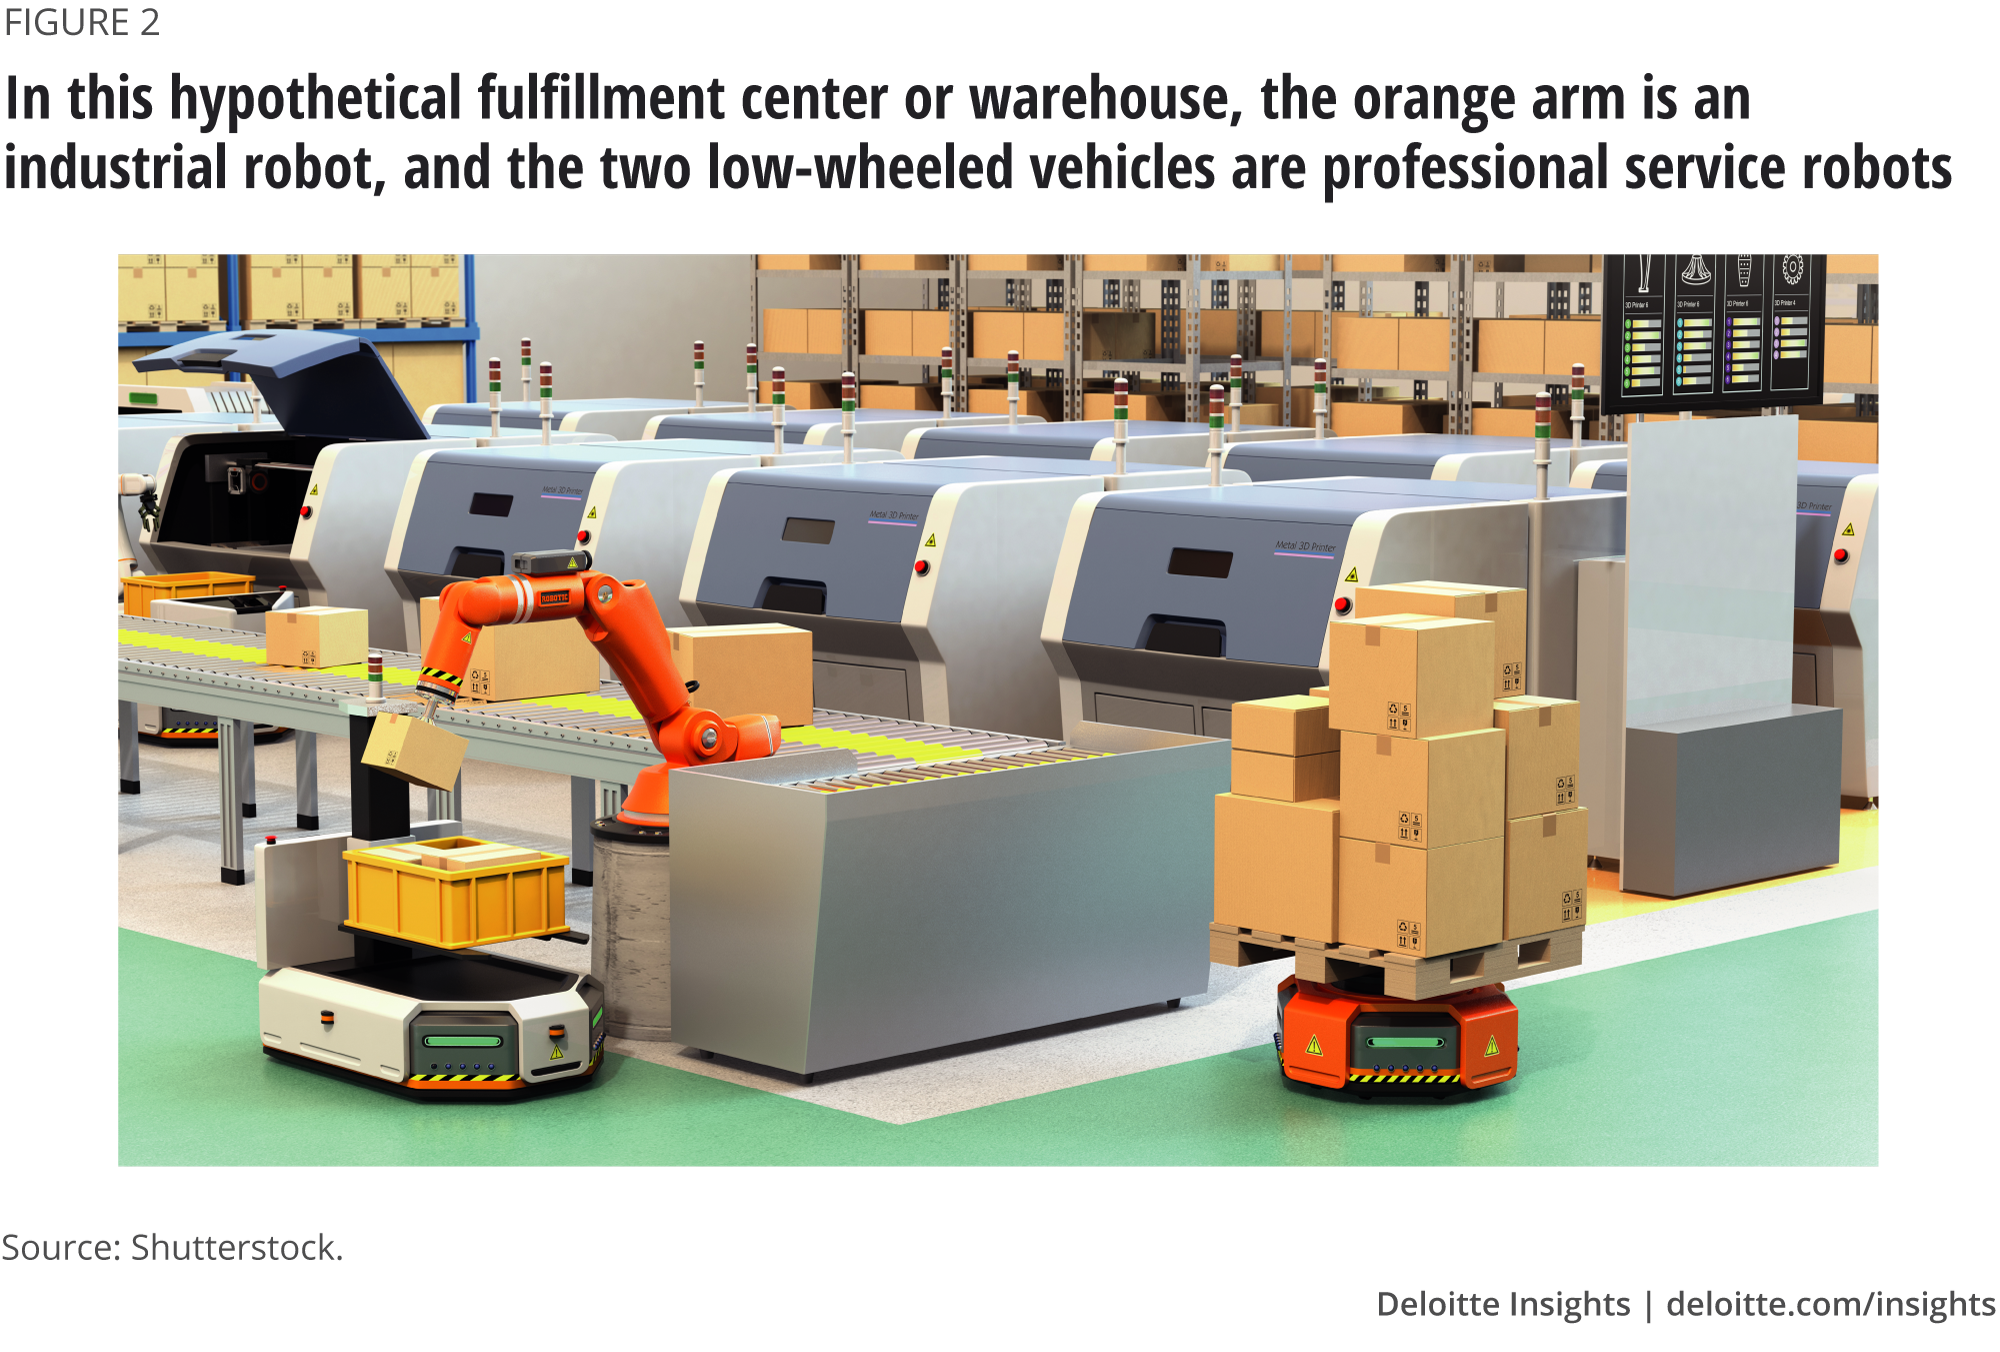 In this hypothetical fulfillment center or warehouse, the orange arm is an industrial robot, and the two low-wheeled vehicles are professional service robots